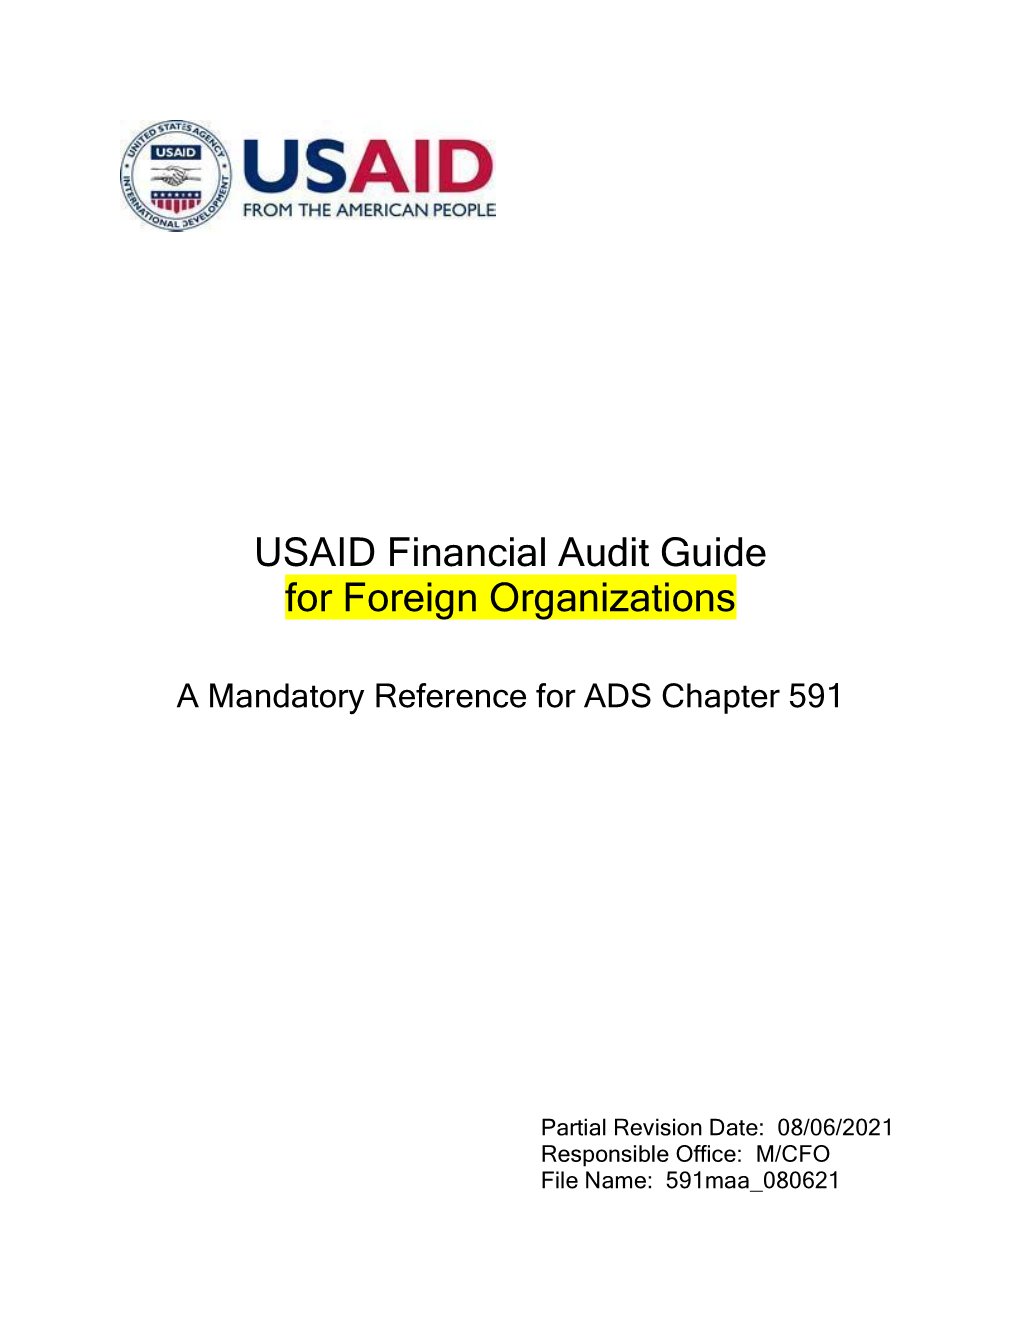 USAID Financial Audit Guide for Foreign Organizations